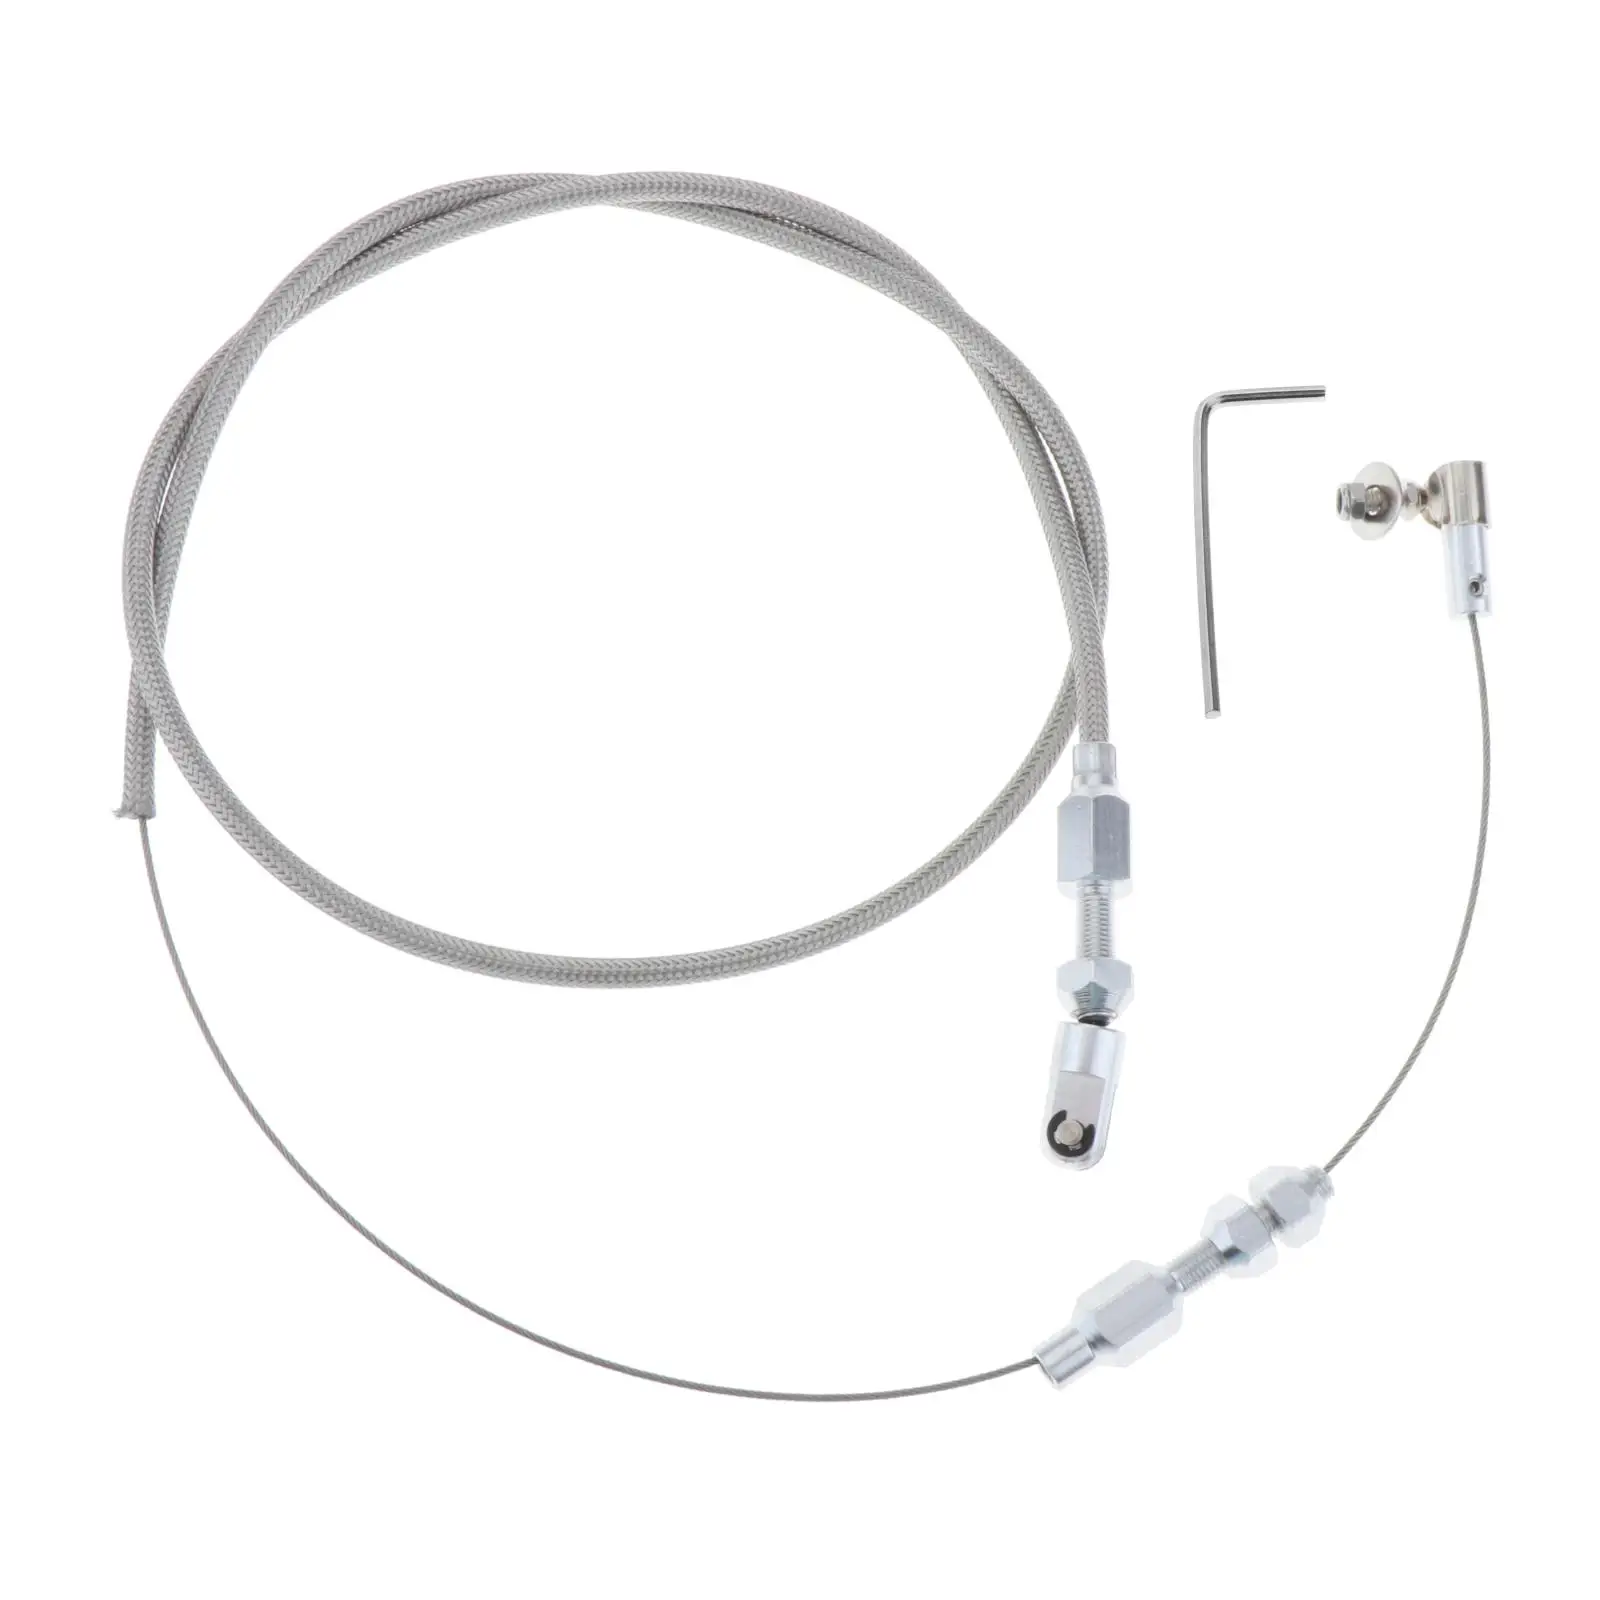 Stainless 56`` Silver Throttle Cable for LS1 4.8l 5.3l 5.7l engines for Chevy